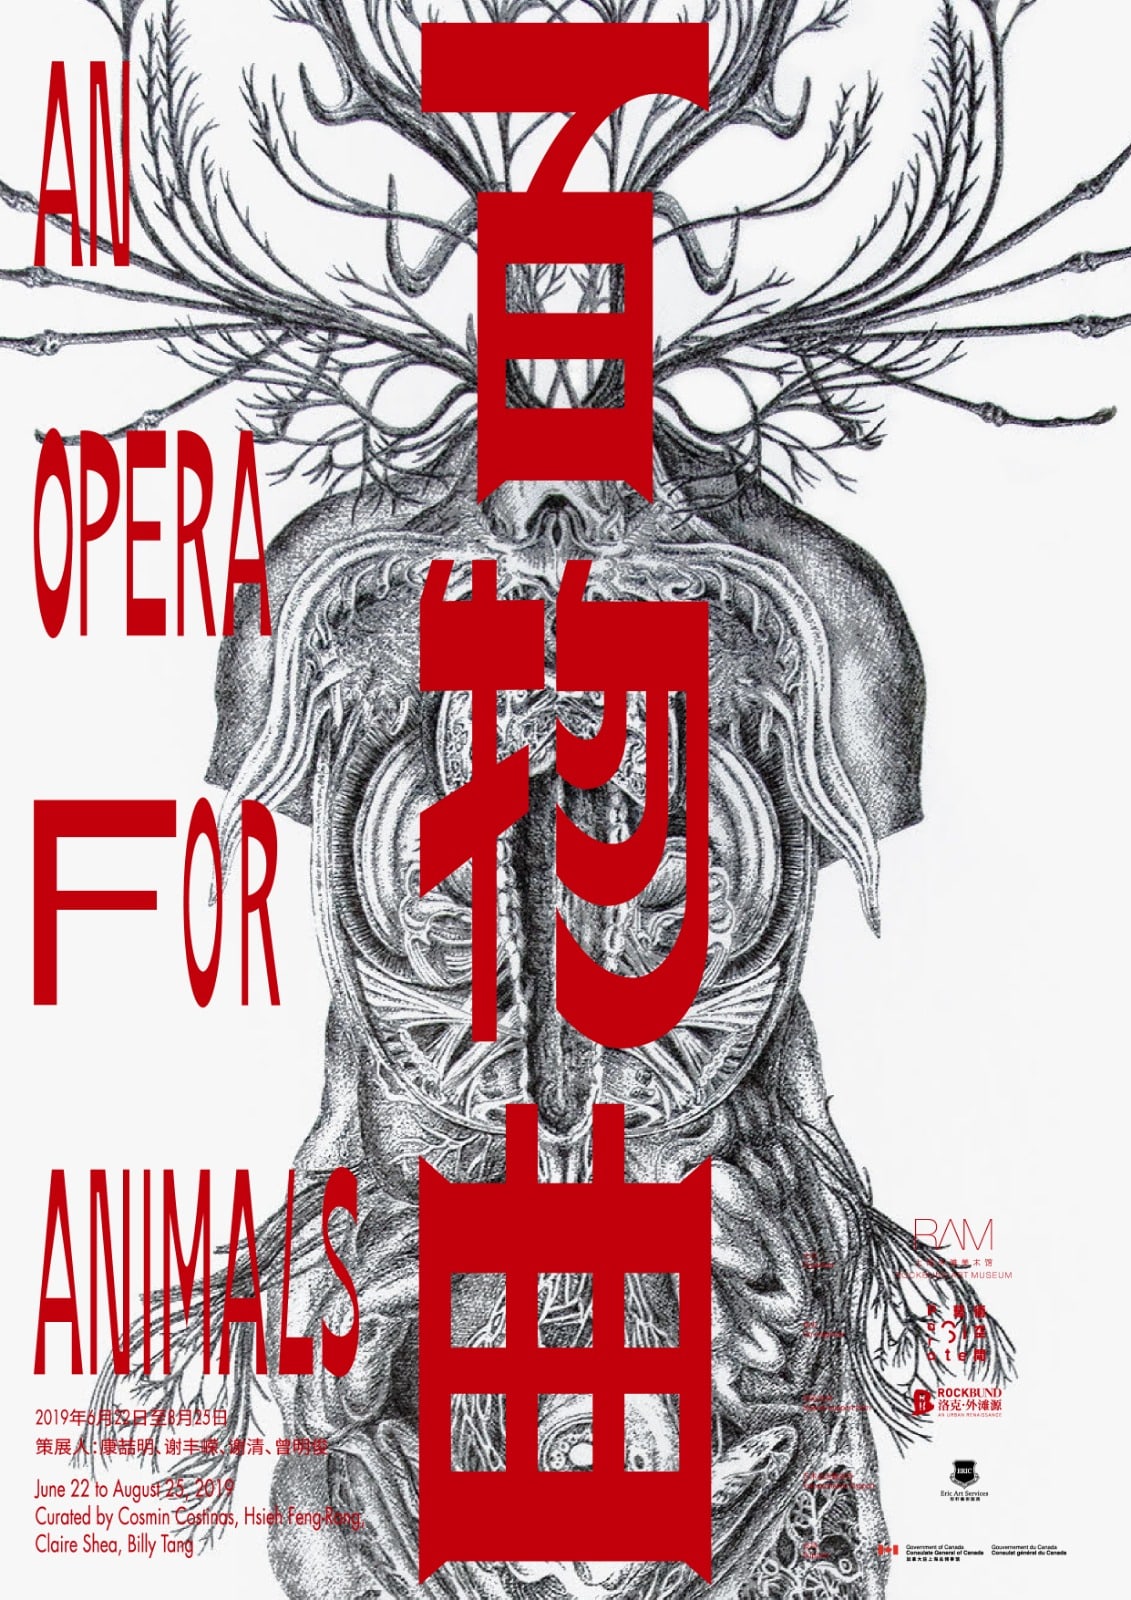 Angela Su and Trevor Yeung take part in “An Opera for Animals” at Rockbund Art Museum, Shanghai